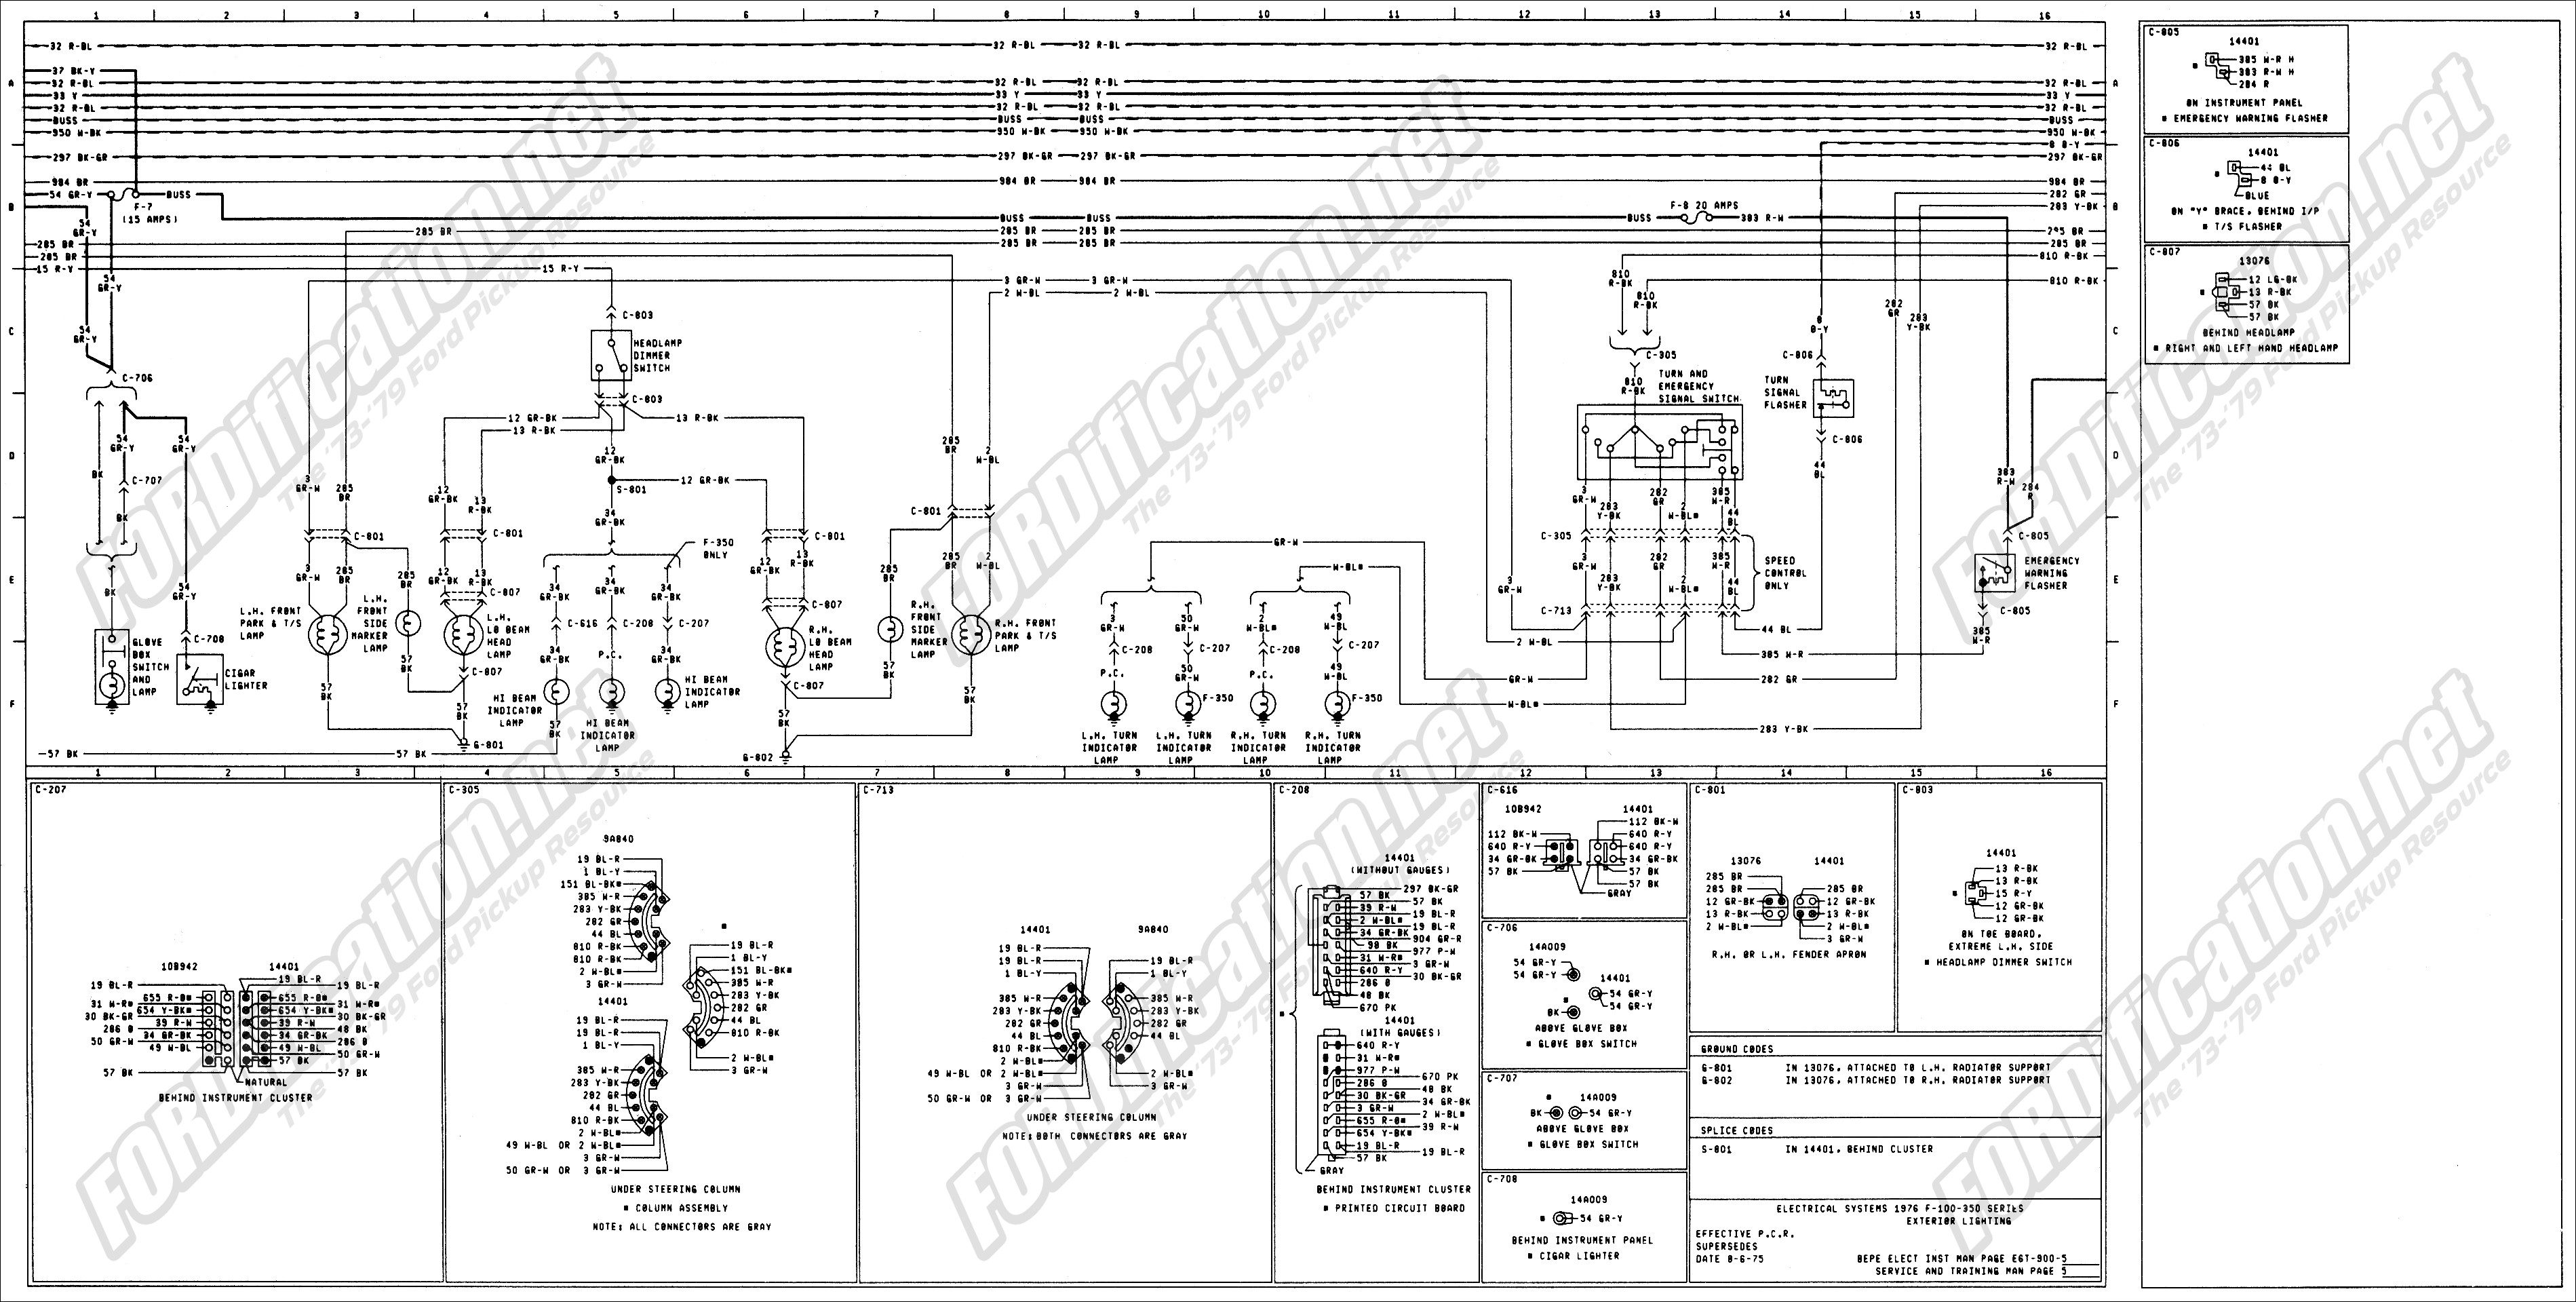 2000 ford F150 Ignition Wiring Diagram 2000 ford F 150 Truck Wiring Schematics 1943 Jeep Willys Of 2000 ford F150 Ignition Wiring Diagram